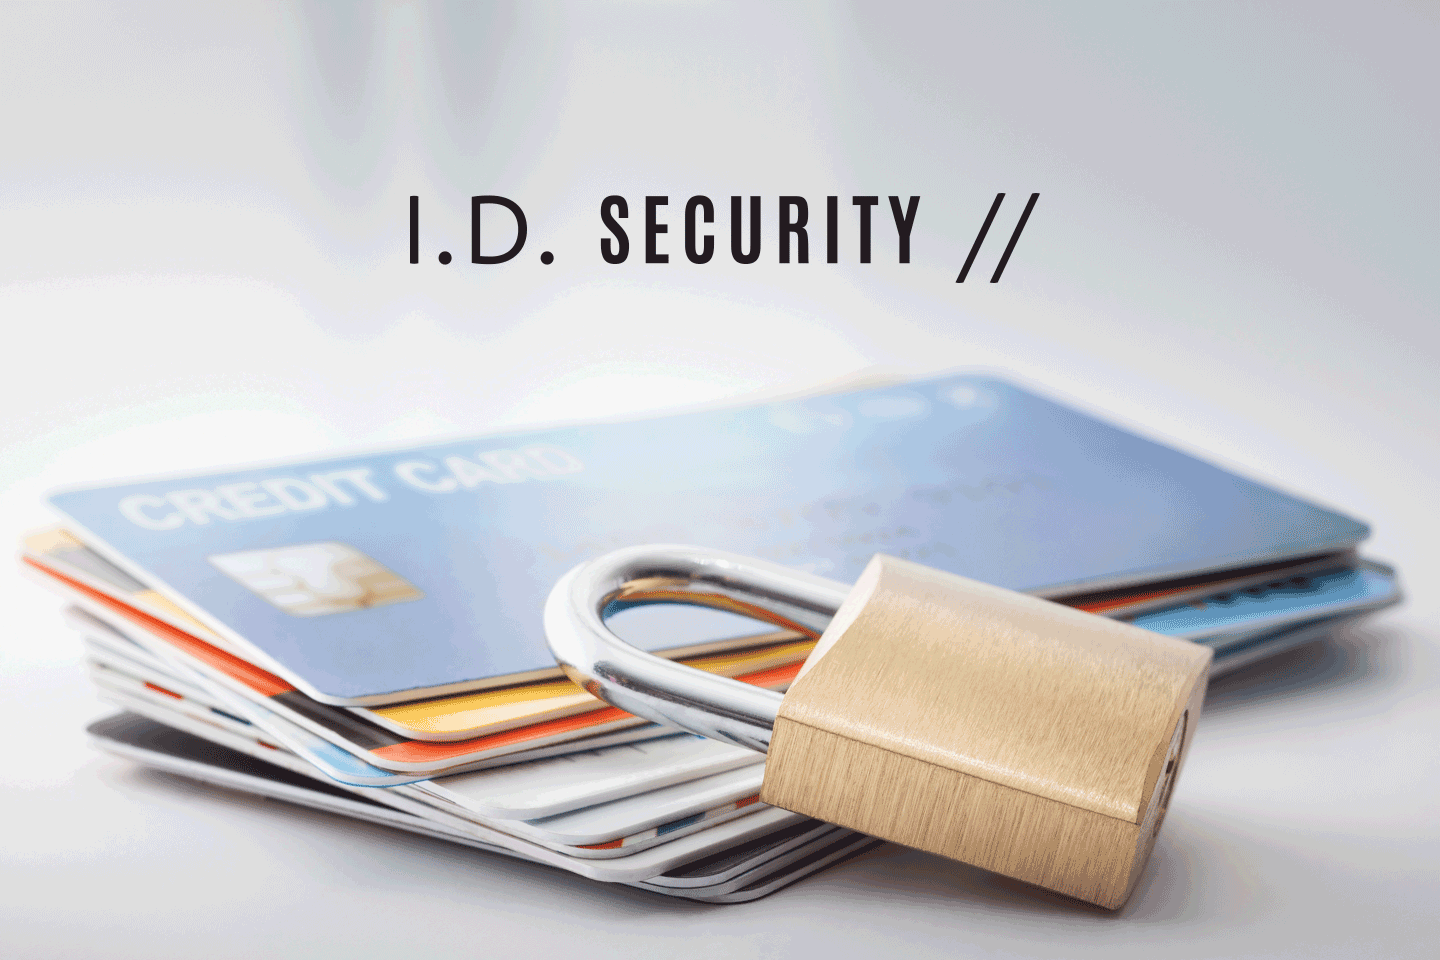 I.D. security chattanooga credit cards and a lock